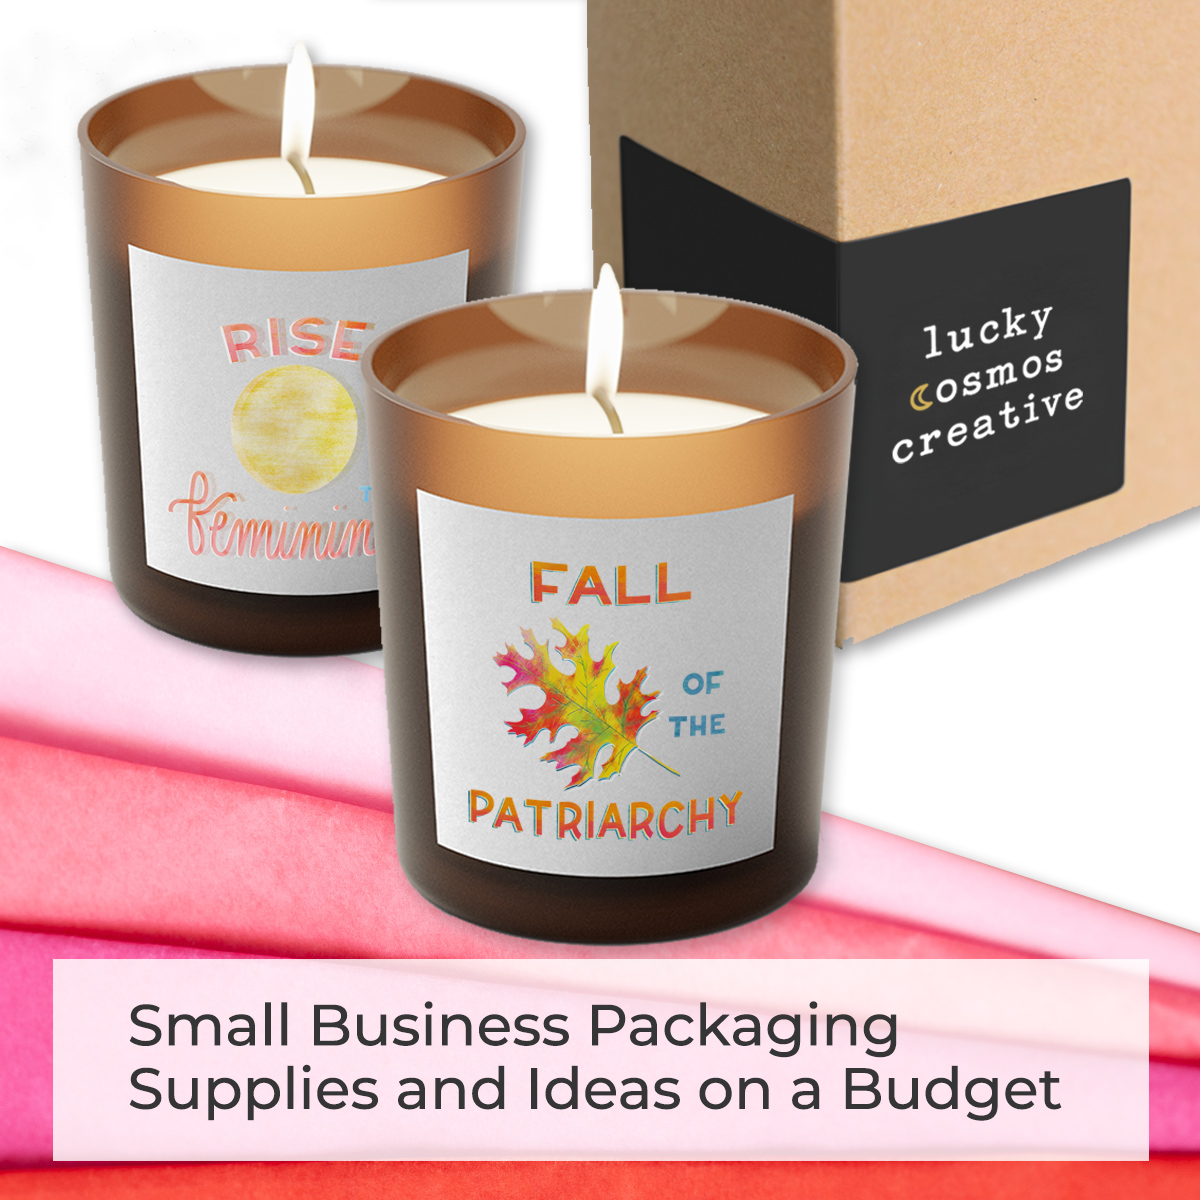 small business packaging ideas on a budget. image shows two candles and a brown box with branded labels.